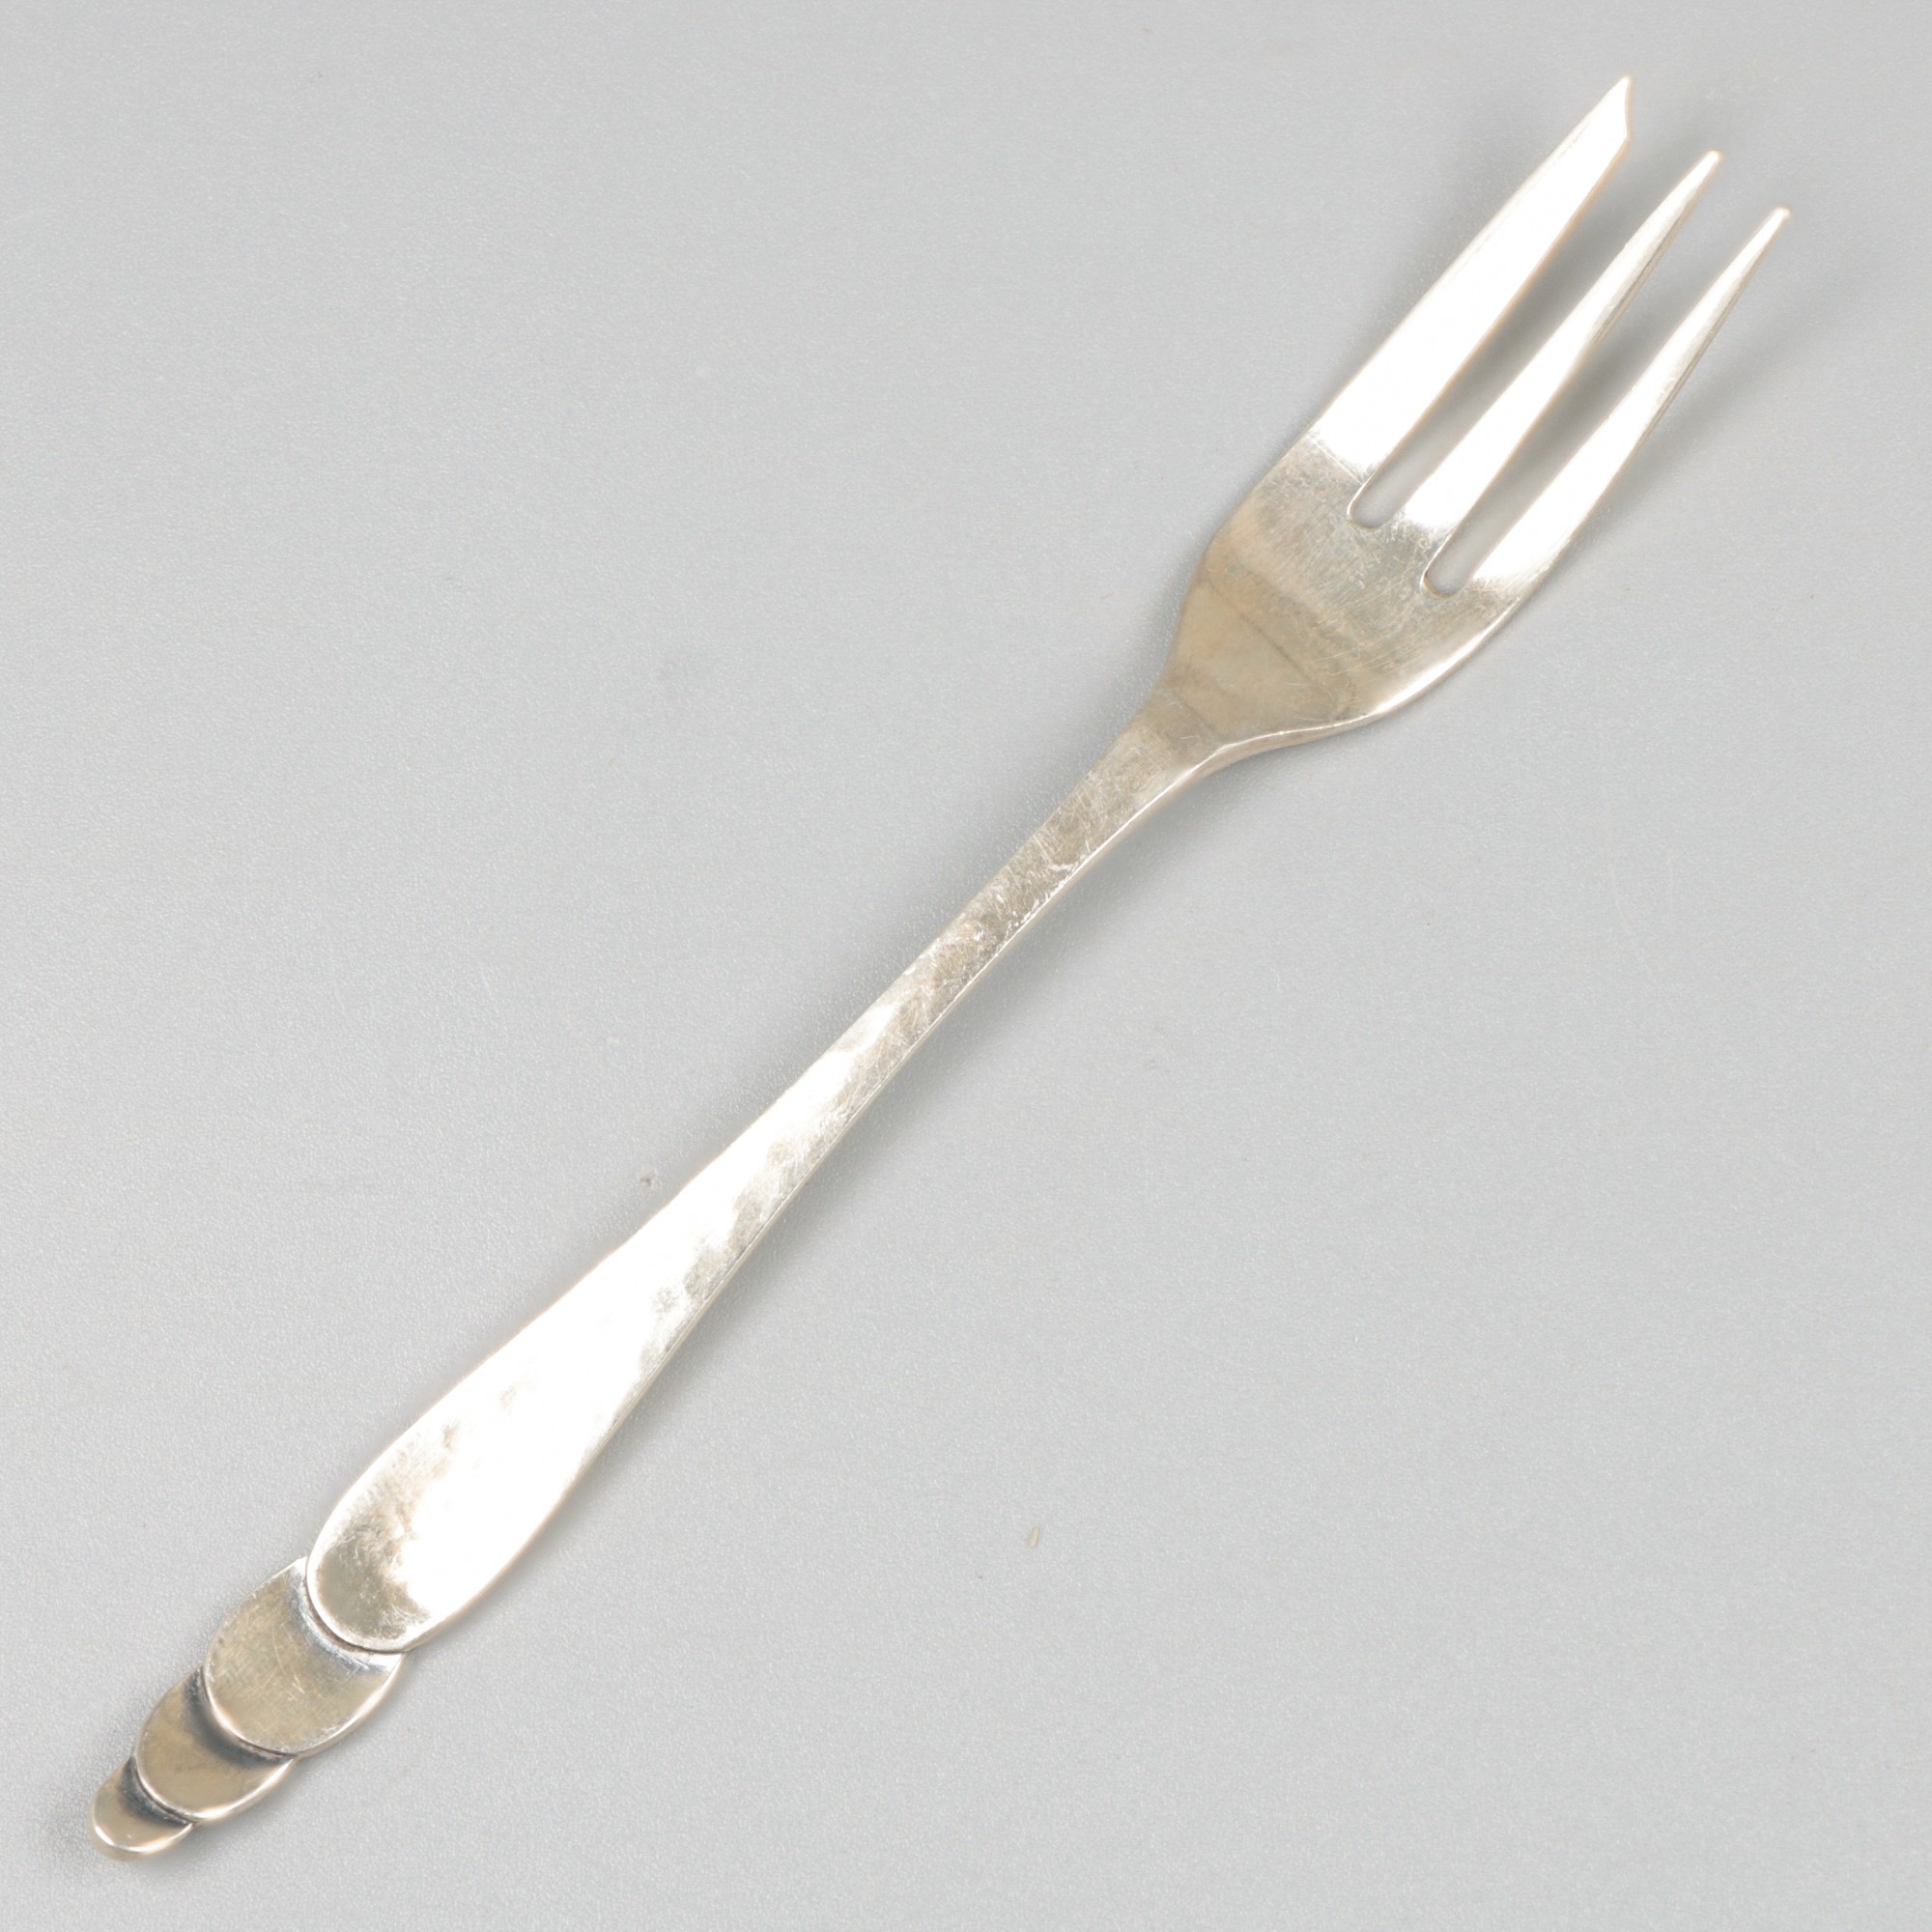 12-piece set of cake / pastry forks silver. - Image 2 of 5